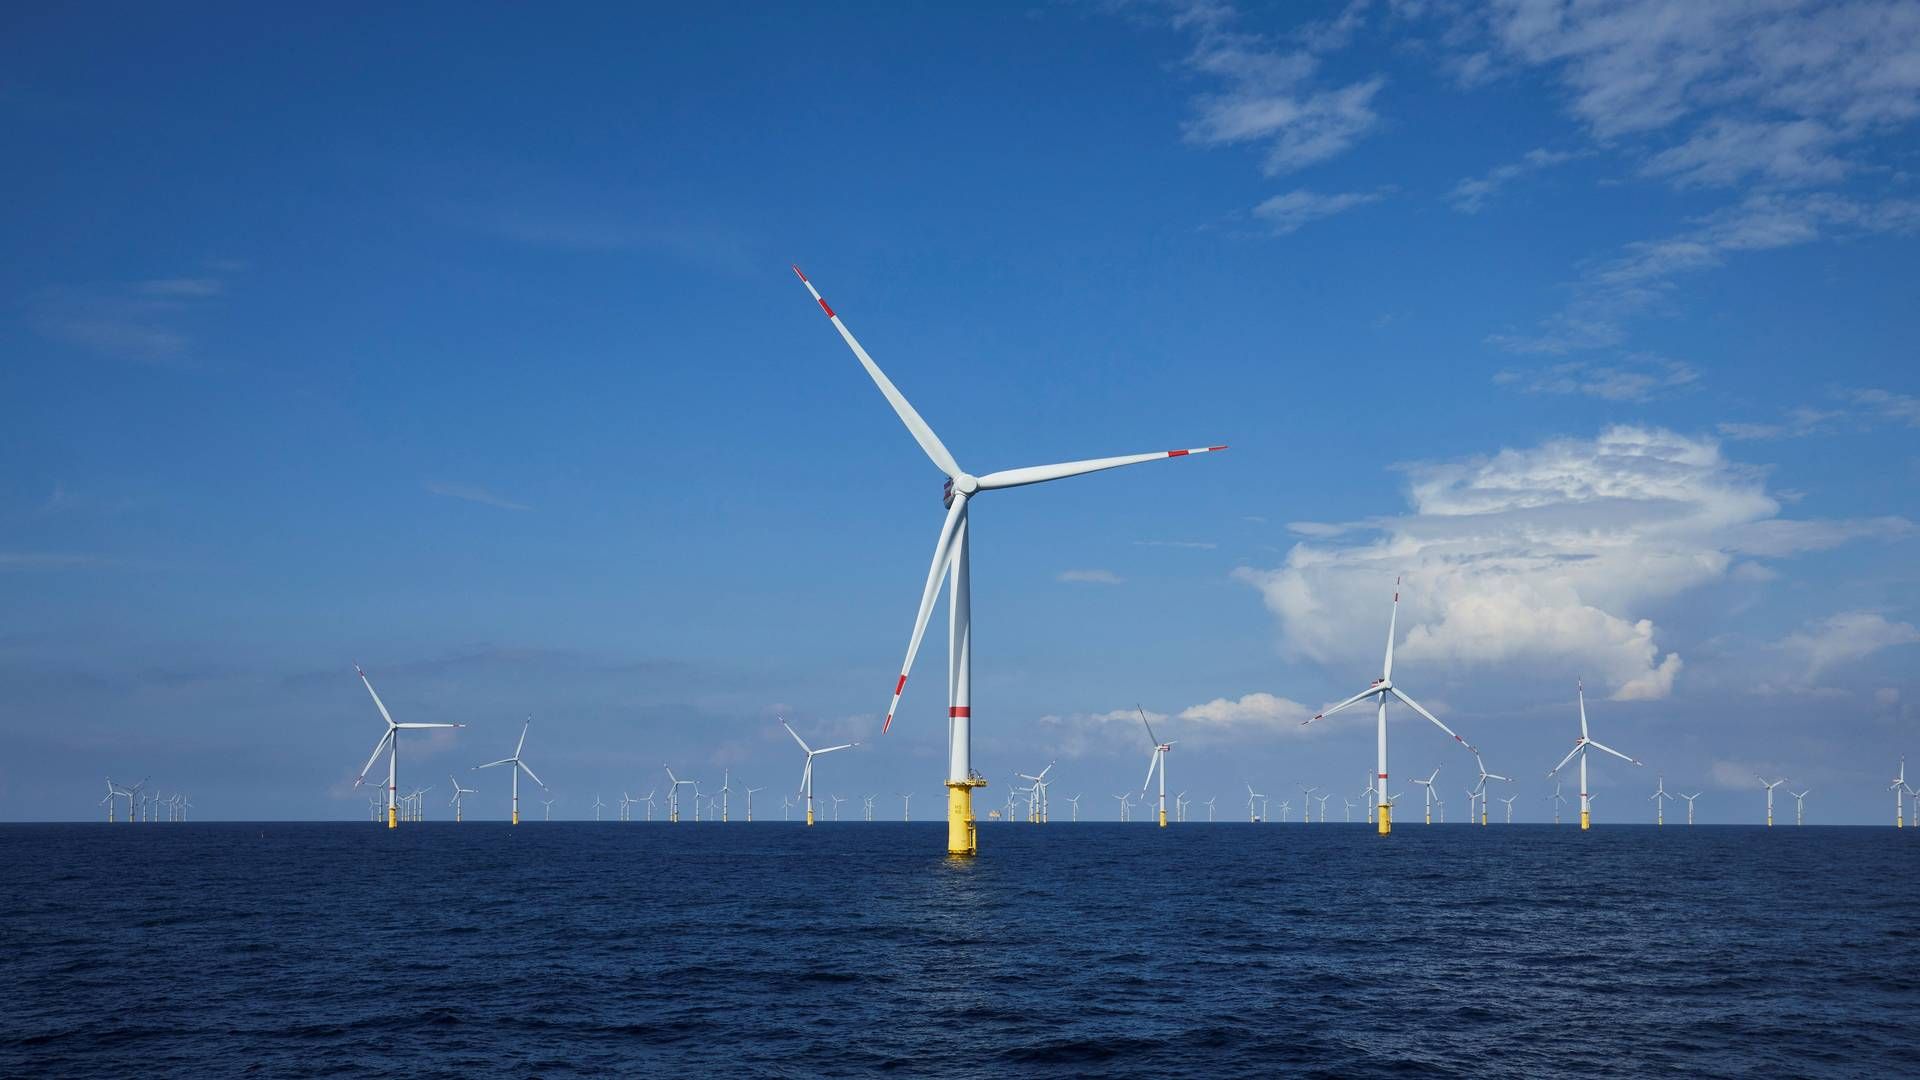 An offshore wind project in the German North Sea, owned by EnBW and Enbridge. | Photo: Enbridge/Reuters/Ritzau Scanpix